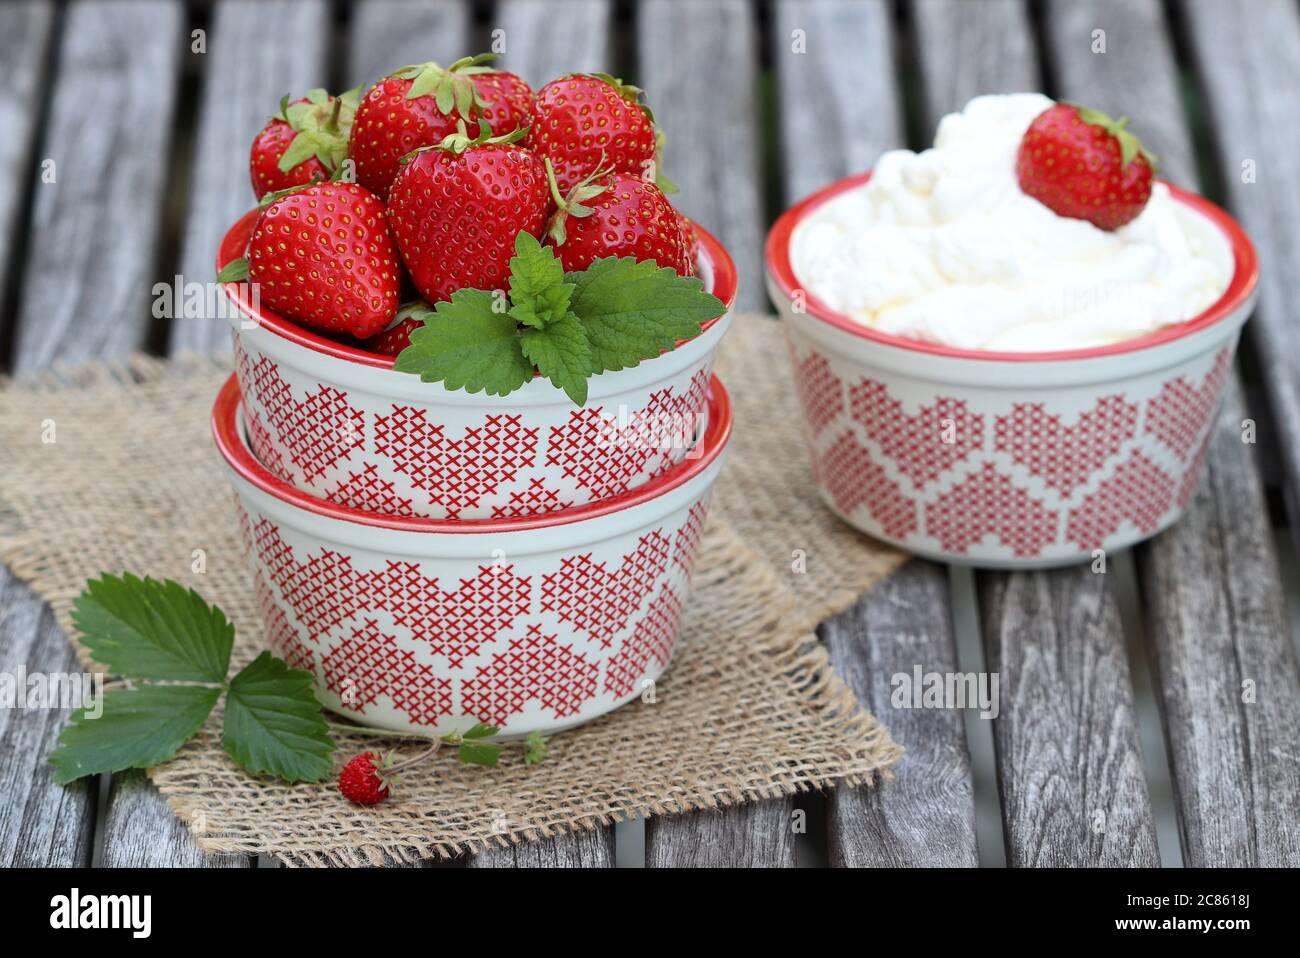 table decoration with fresh starawberries in bowl and whipped cream Stock Photo